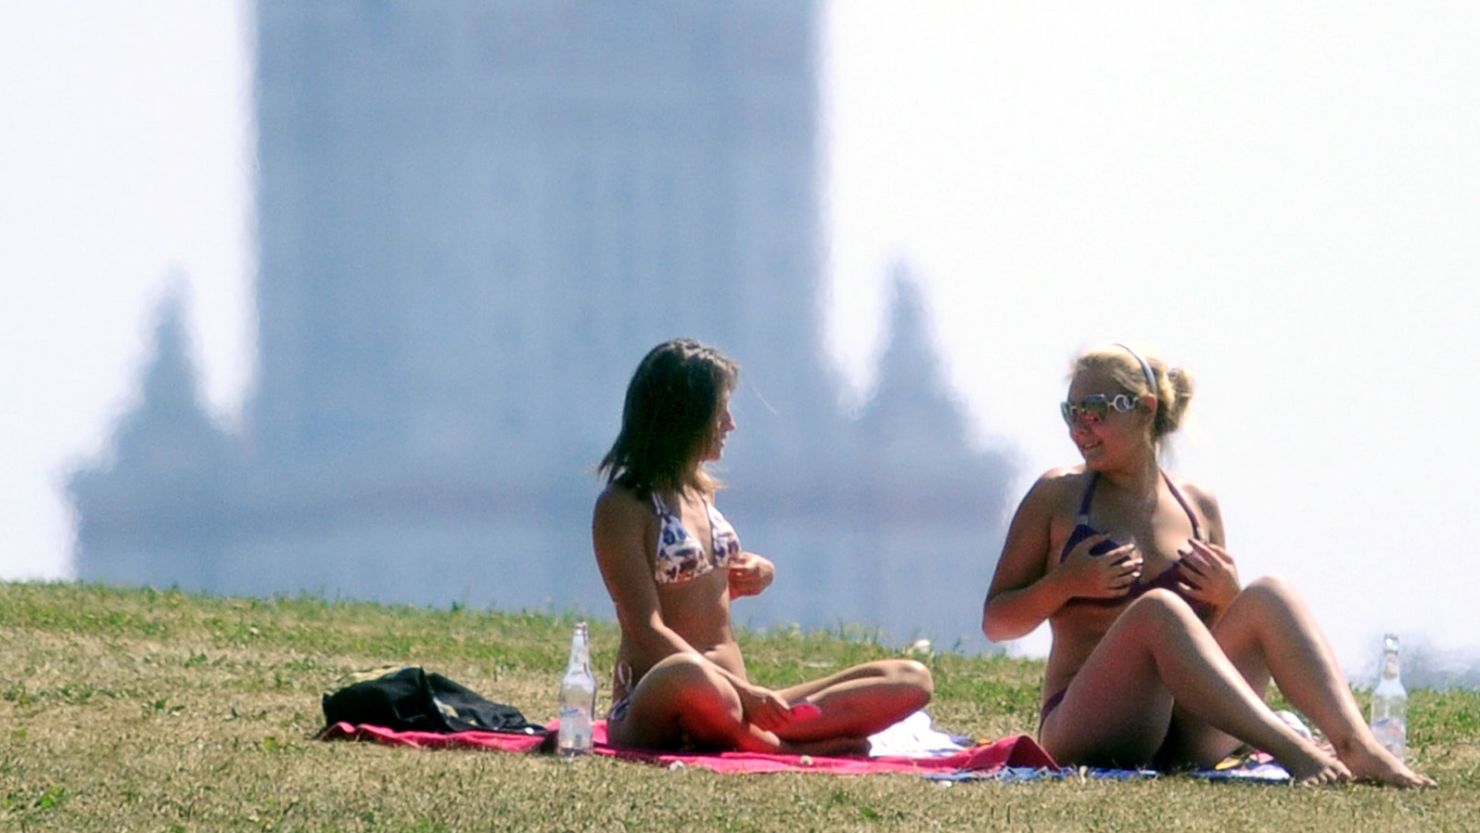 Not all Moscow's sunbathers want to get naked.